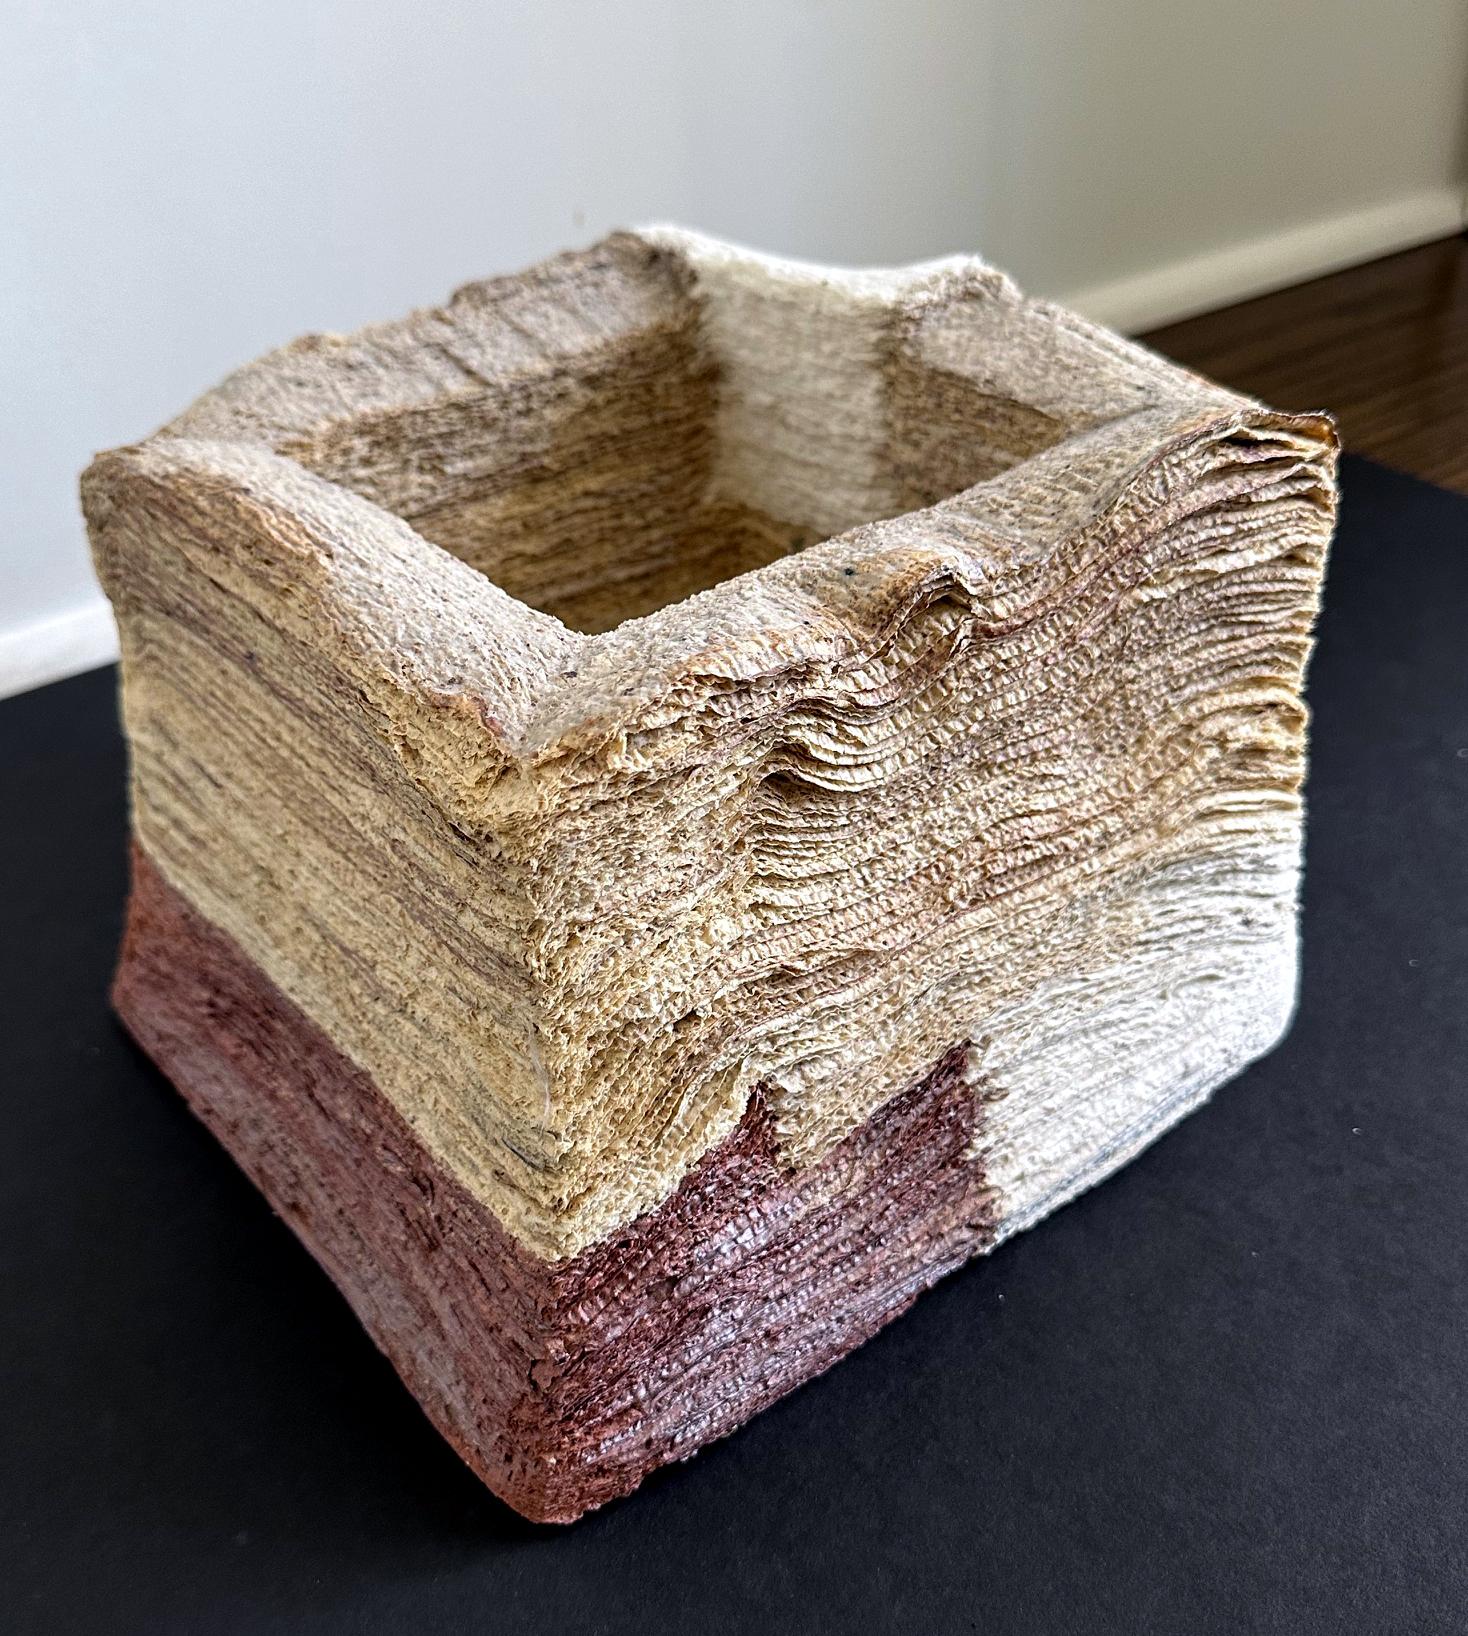 A highly unique ceramic sculpture by South Korean artist Jongjin Park (1982-). The square-form piece is boundary-pushing and defies both the traditional function of a vessel and the very definition of ceramic. The artist developed a creative method